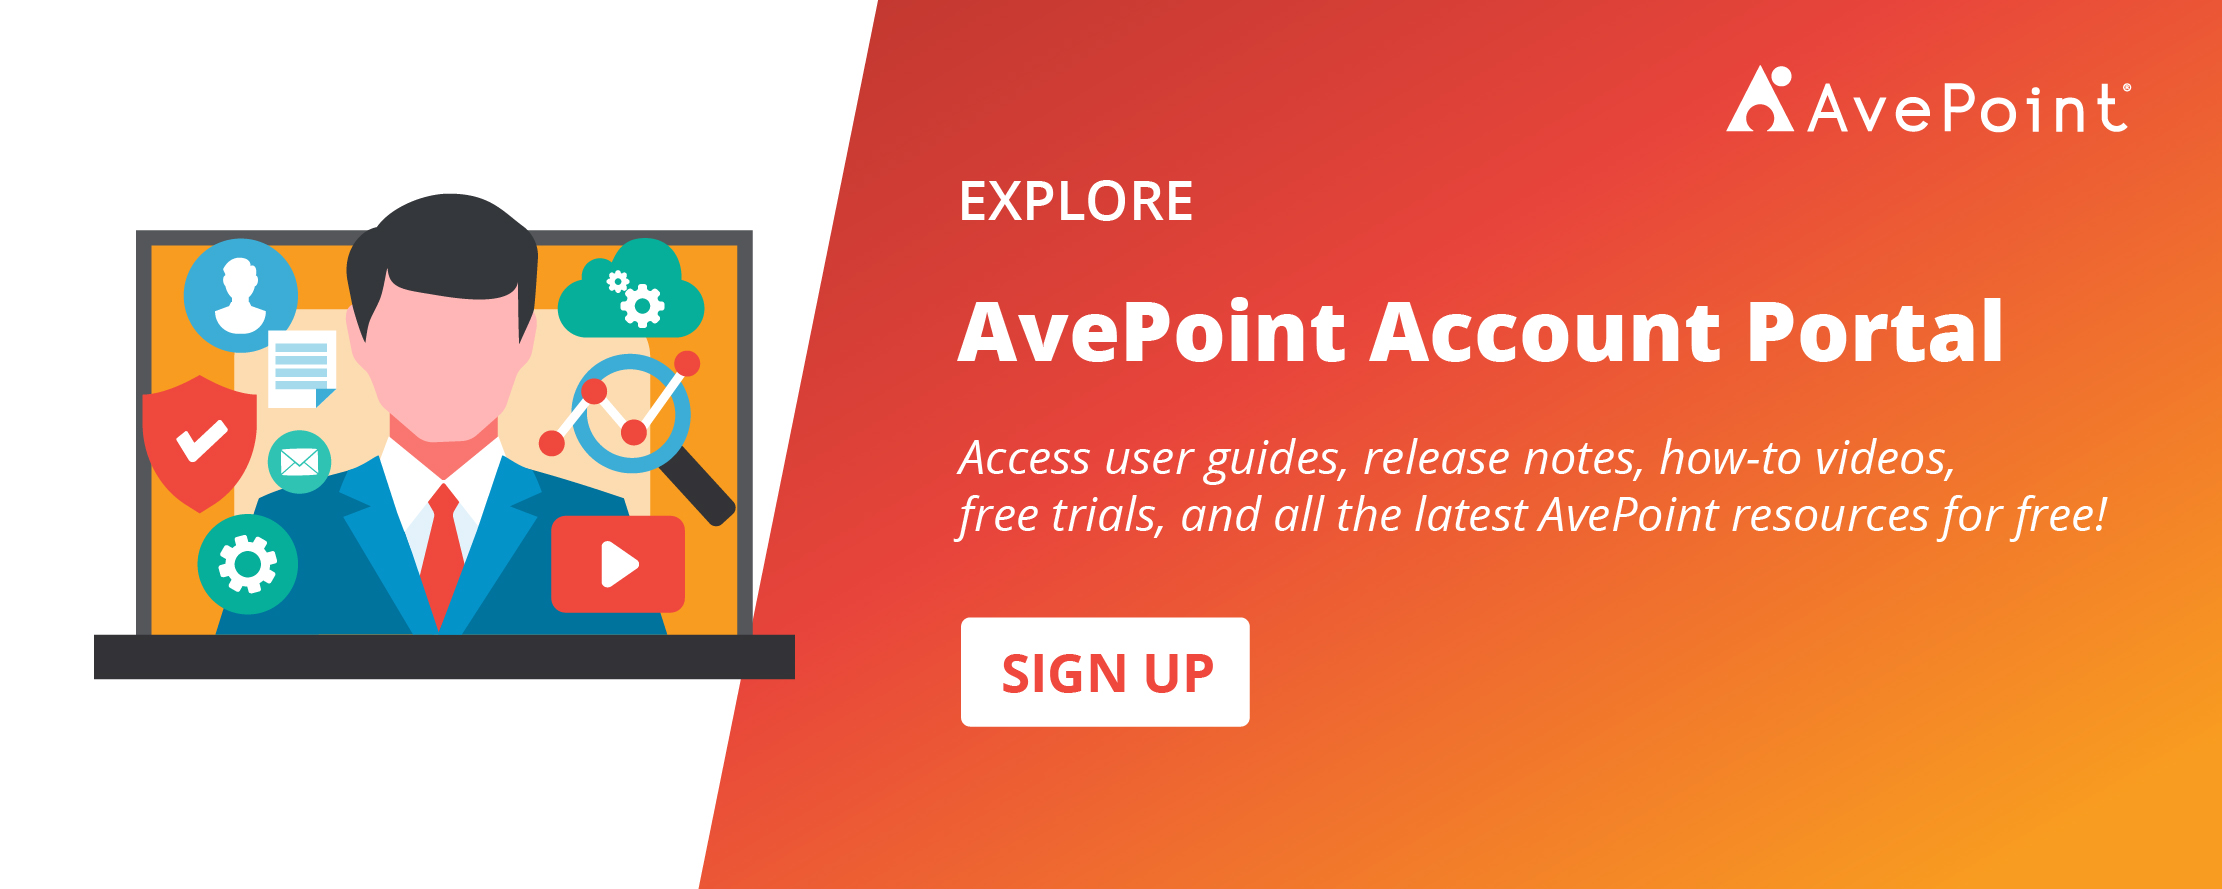 avepoint-account-portal-sign-up